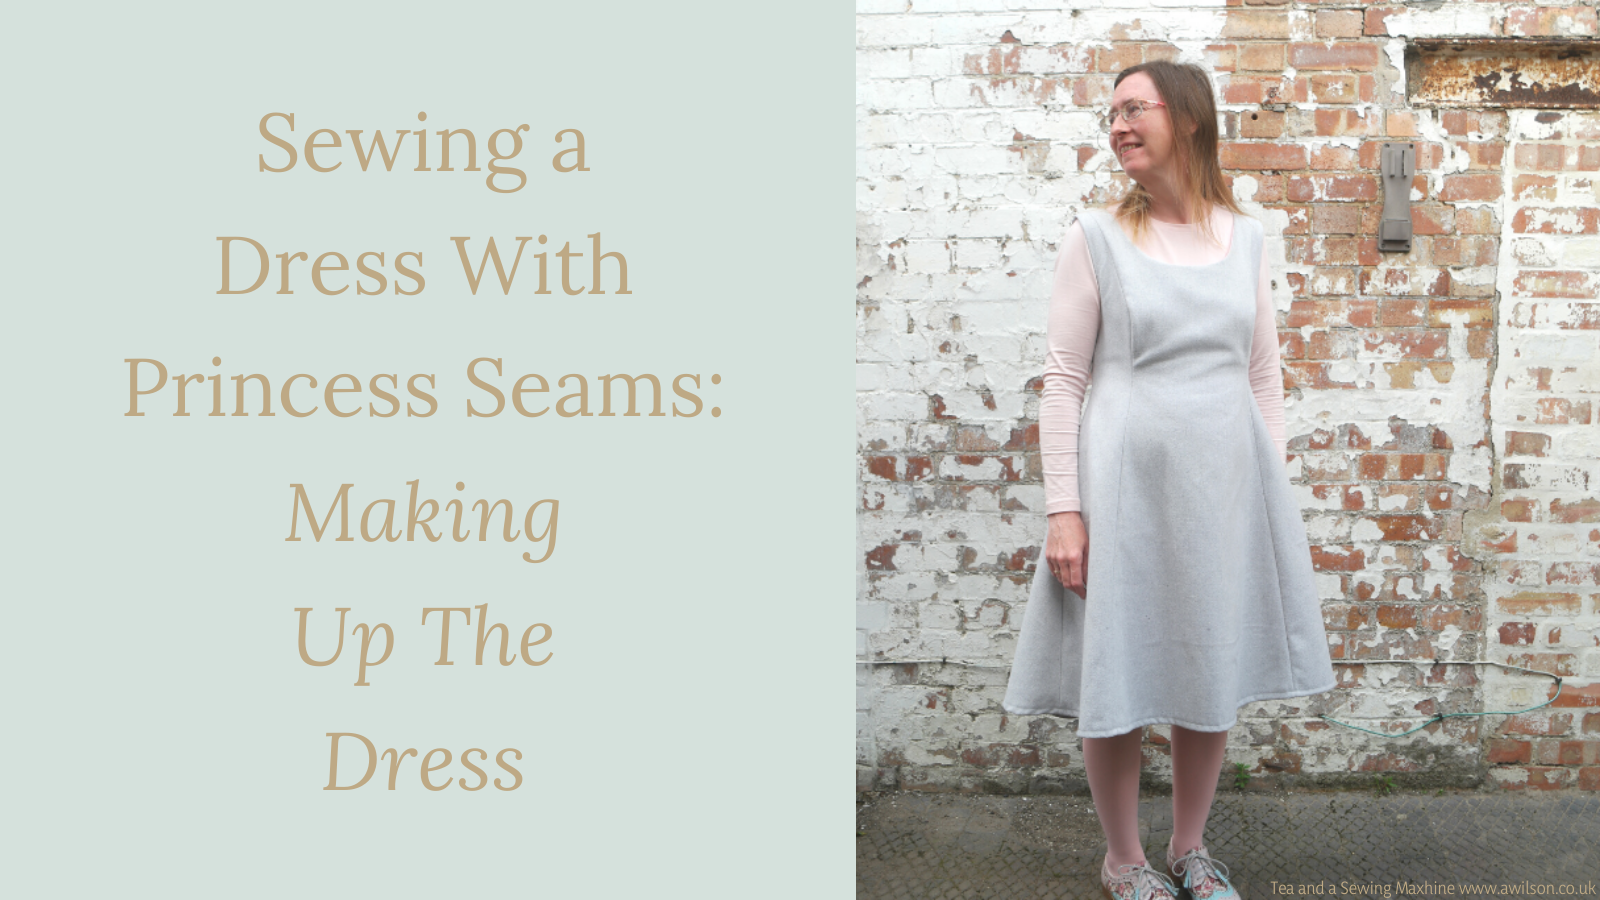 https://www.awilson.co.uk/wp-content/uploads/2021/05/Sewing-a-Dress-With-Princess-Seams-Making-Up-The-Dress.png